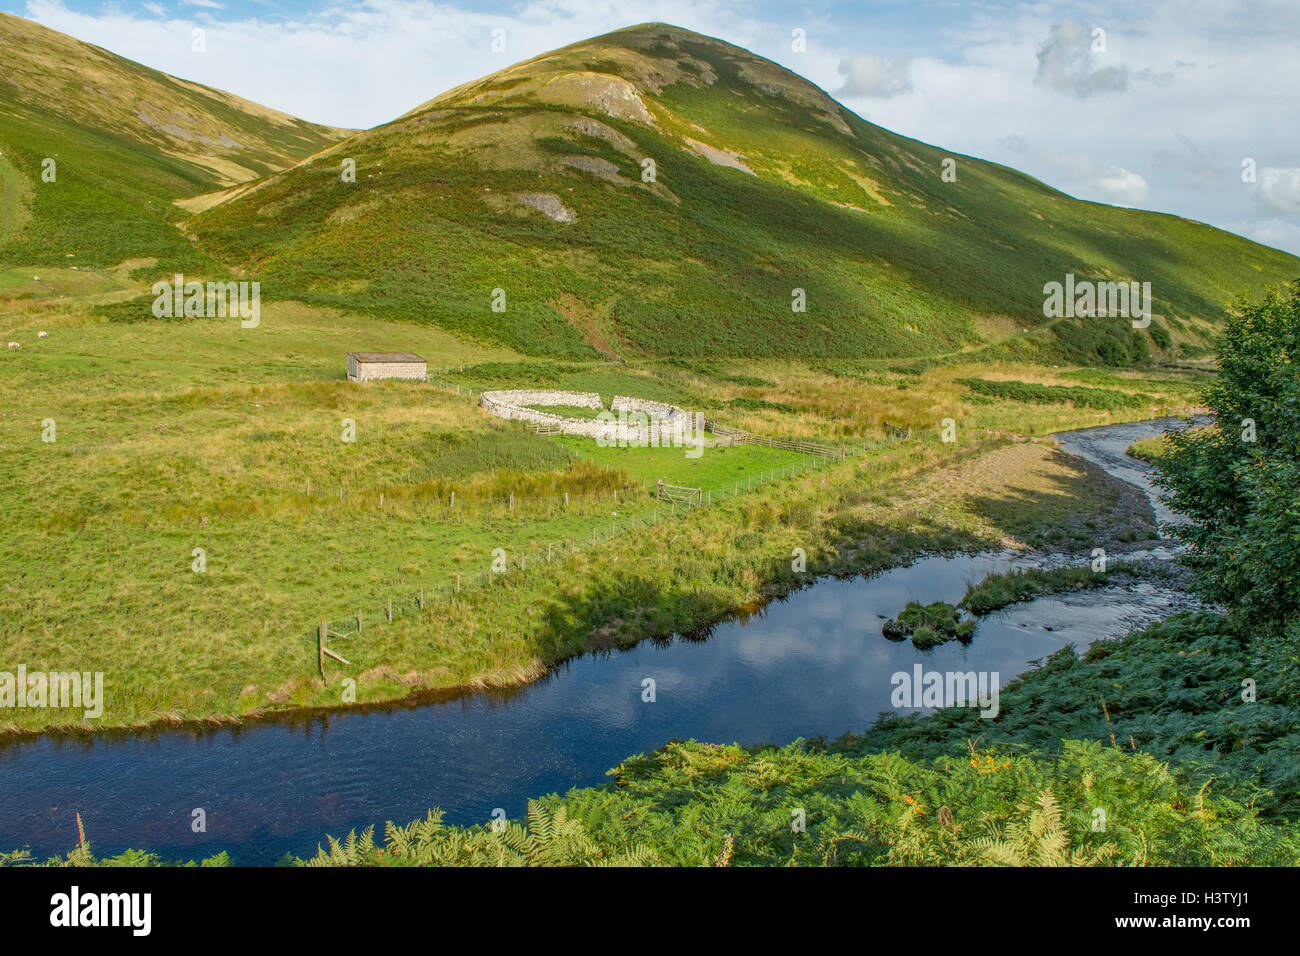 Fiume Coquet, Upper Coquetdale, Northumberland, Inghilterra Foto Stock